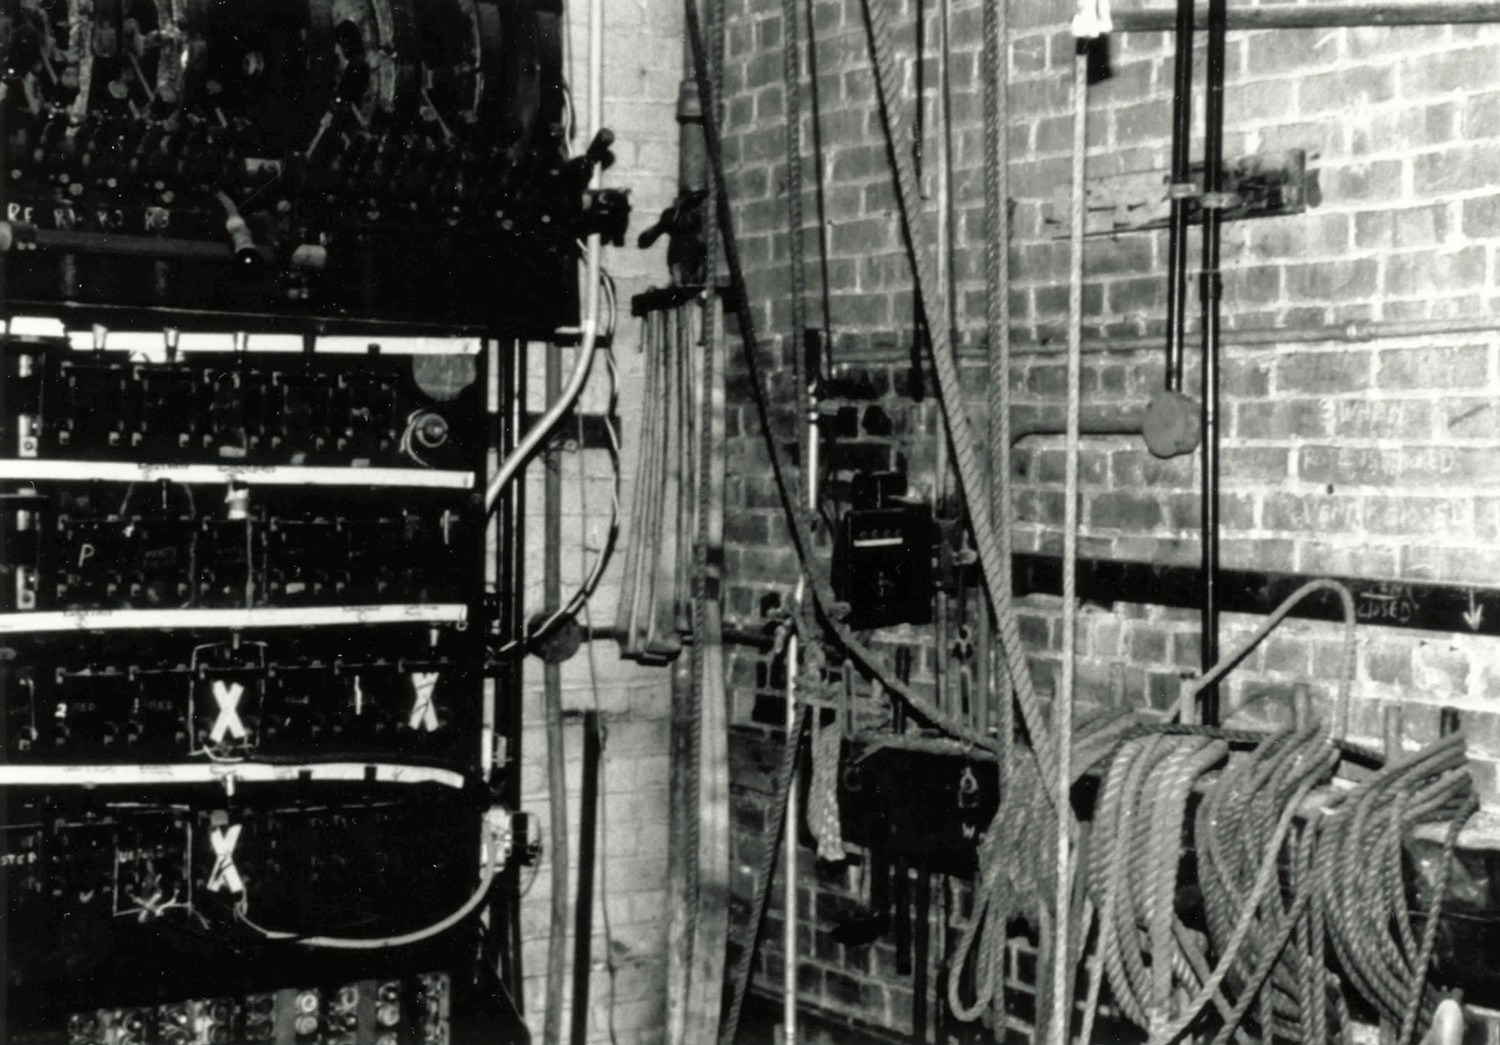 New Orpheum Theatre, Champaign Illinois Original electrical circuit box and scenery pin-rail behind stage (1990)